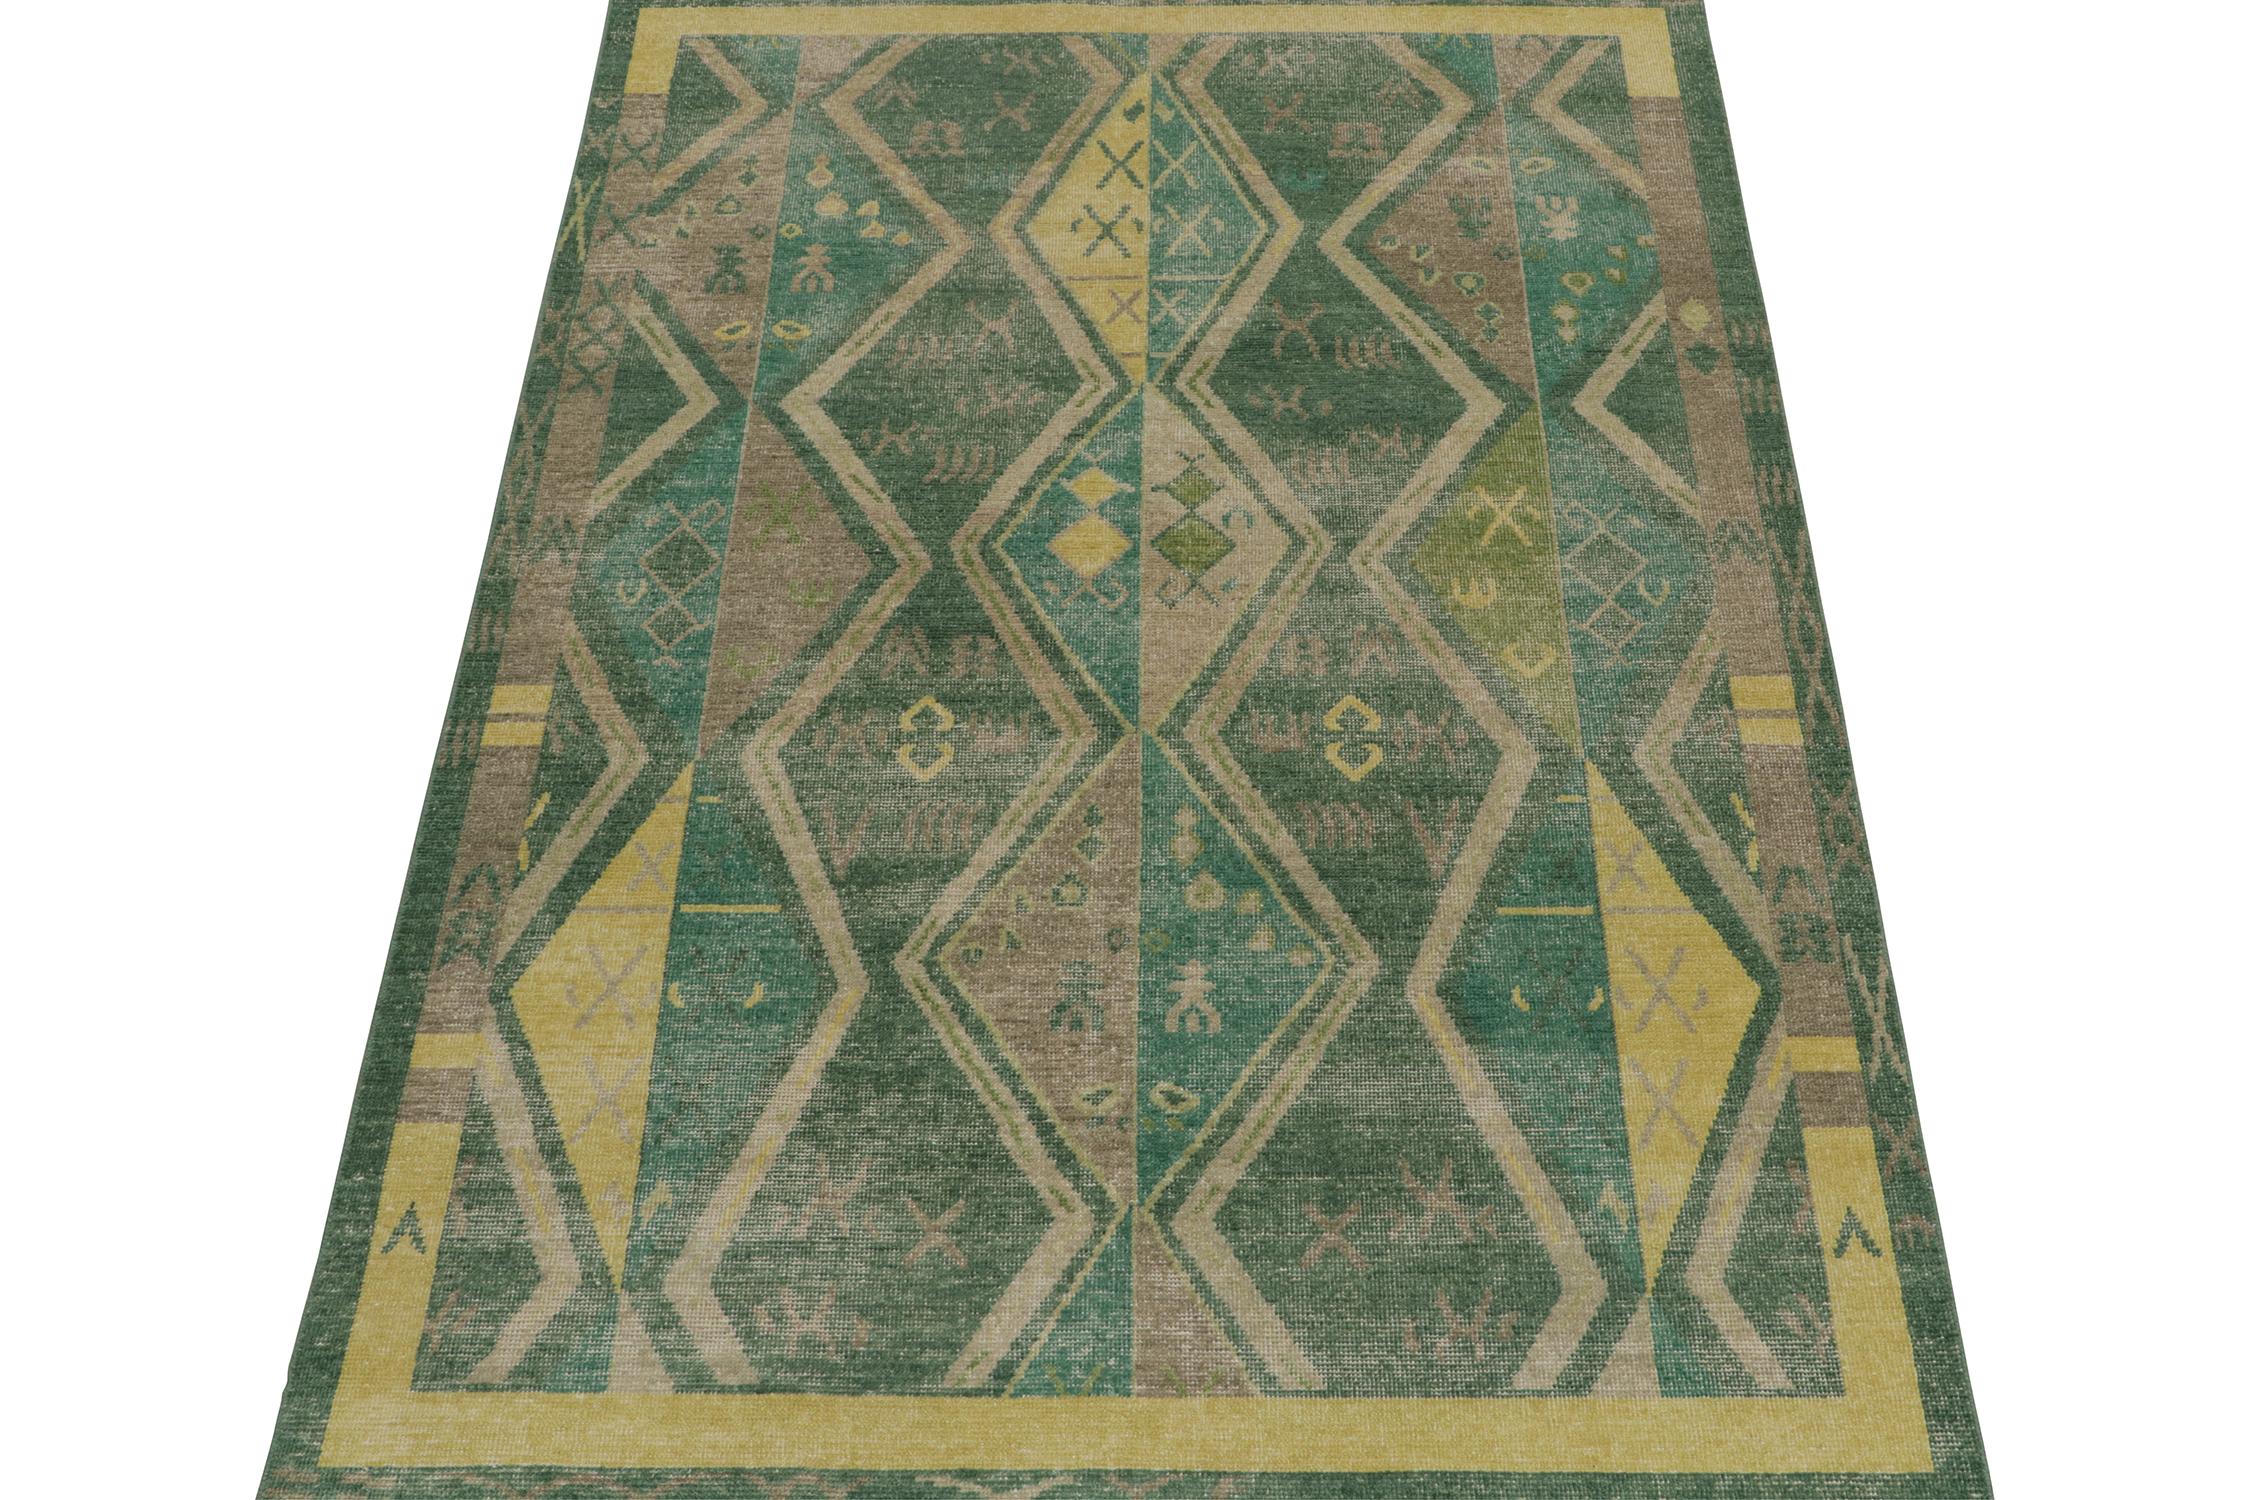 This 6x9 rug is a bold new new addition to Rug & Kilim’s Homage Collection. Hand-knotted in wool, its design celebrates antique Yuruk tribal rugs in fresh, modern colors and a unique textural approach. 

Further on the Design:

The eye is drawn